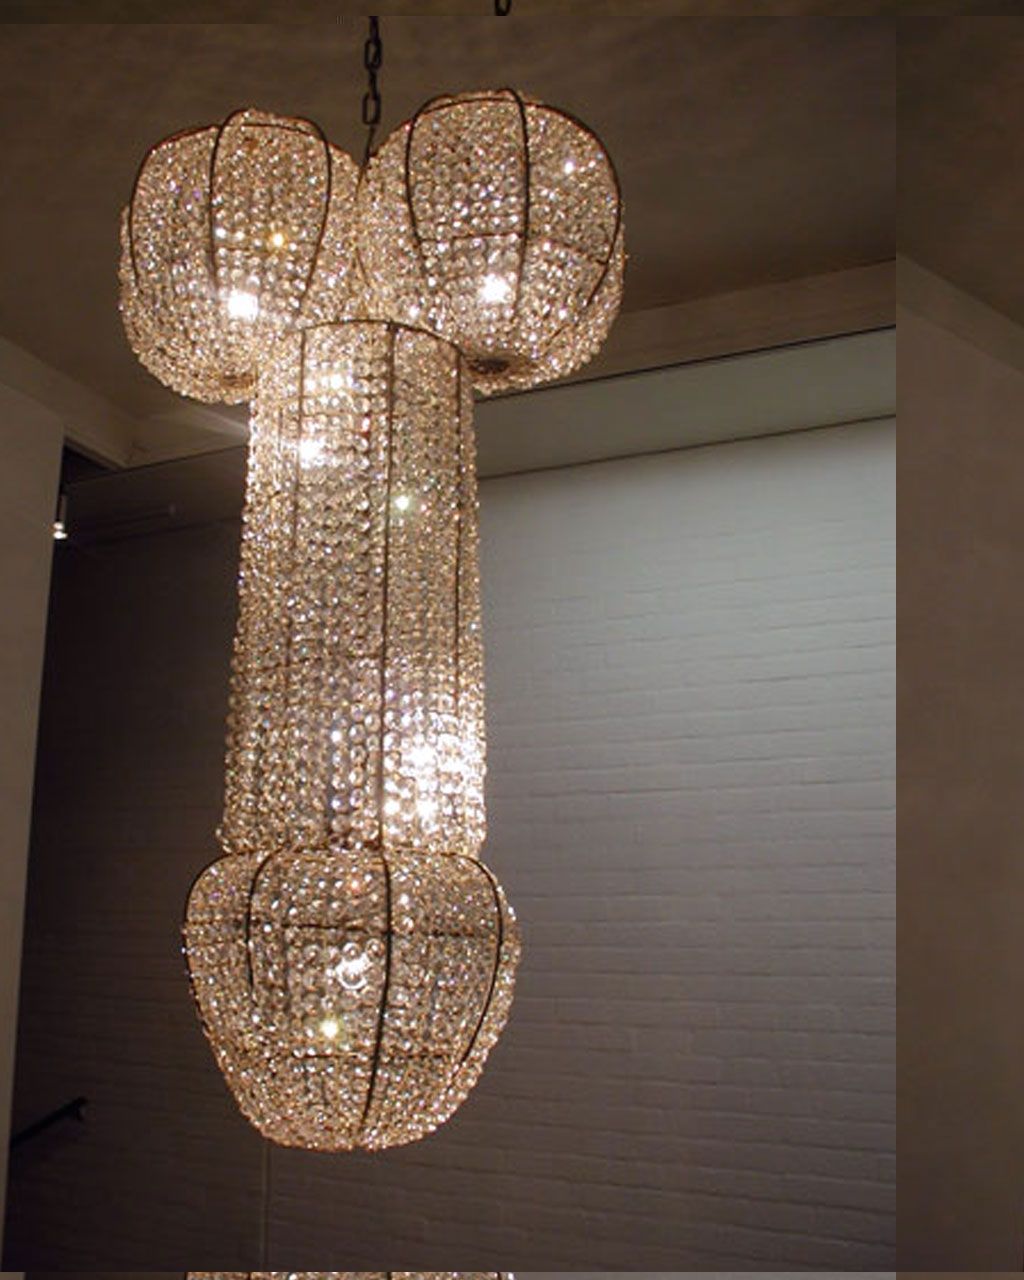 Chandelier Glamorous Contemporary Chandelier Lighting Intended For Contemporary Modern Chandeliers (View 2 of 15)